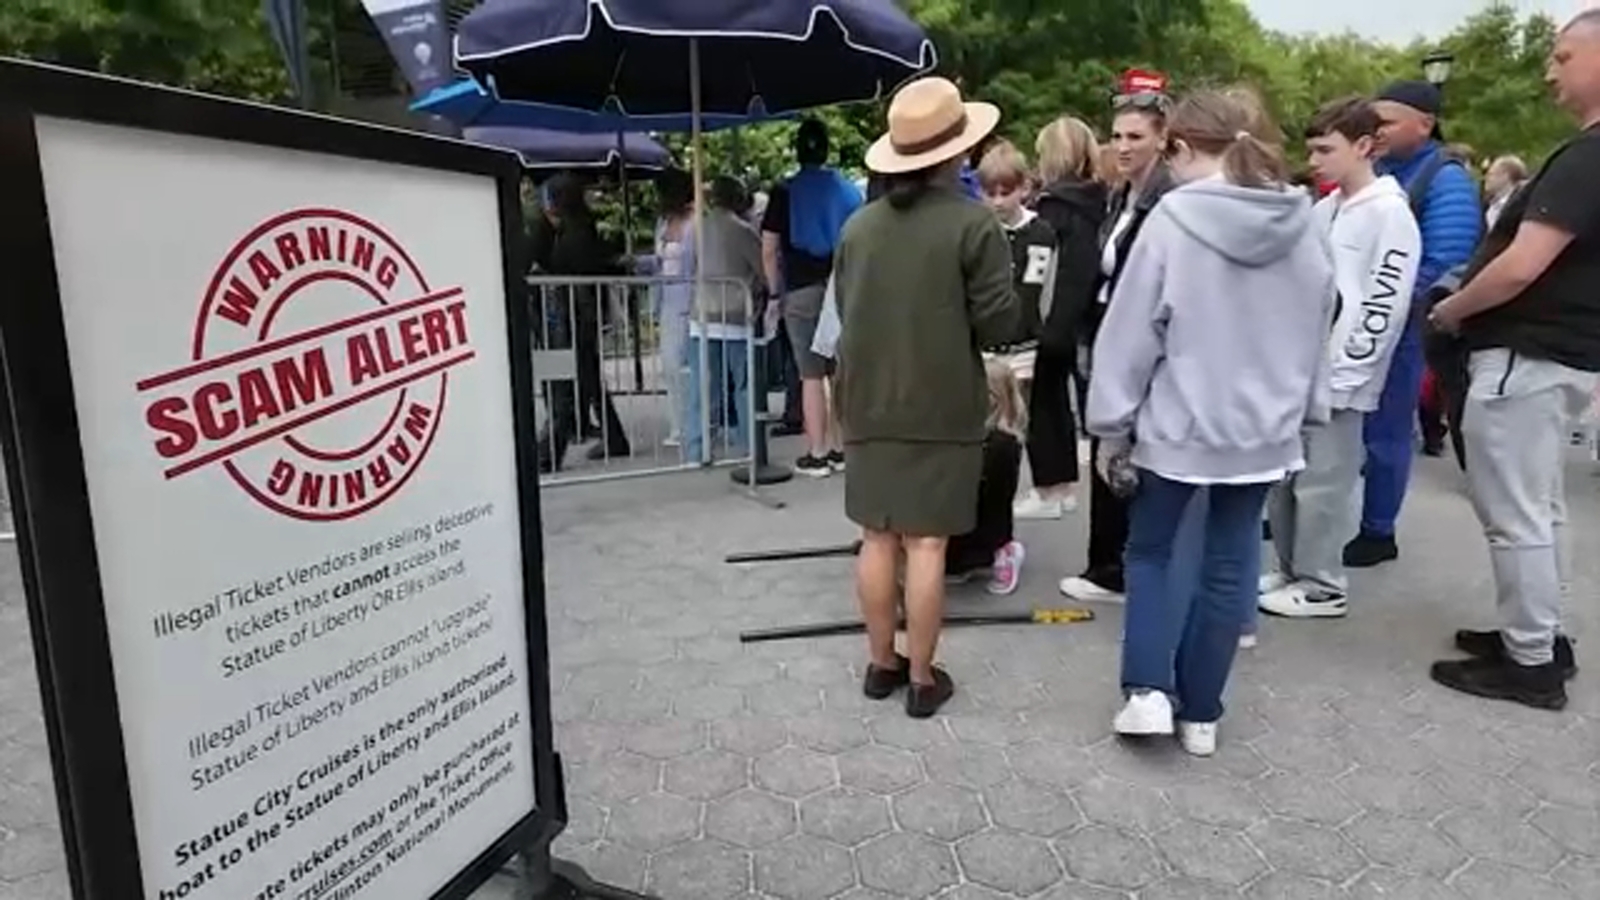 Battery Park scam alert: Statue of Liberty ticket scammers preying on tourists [Video]